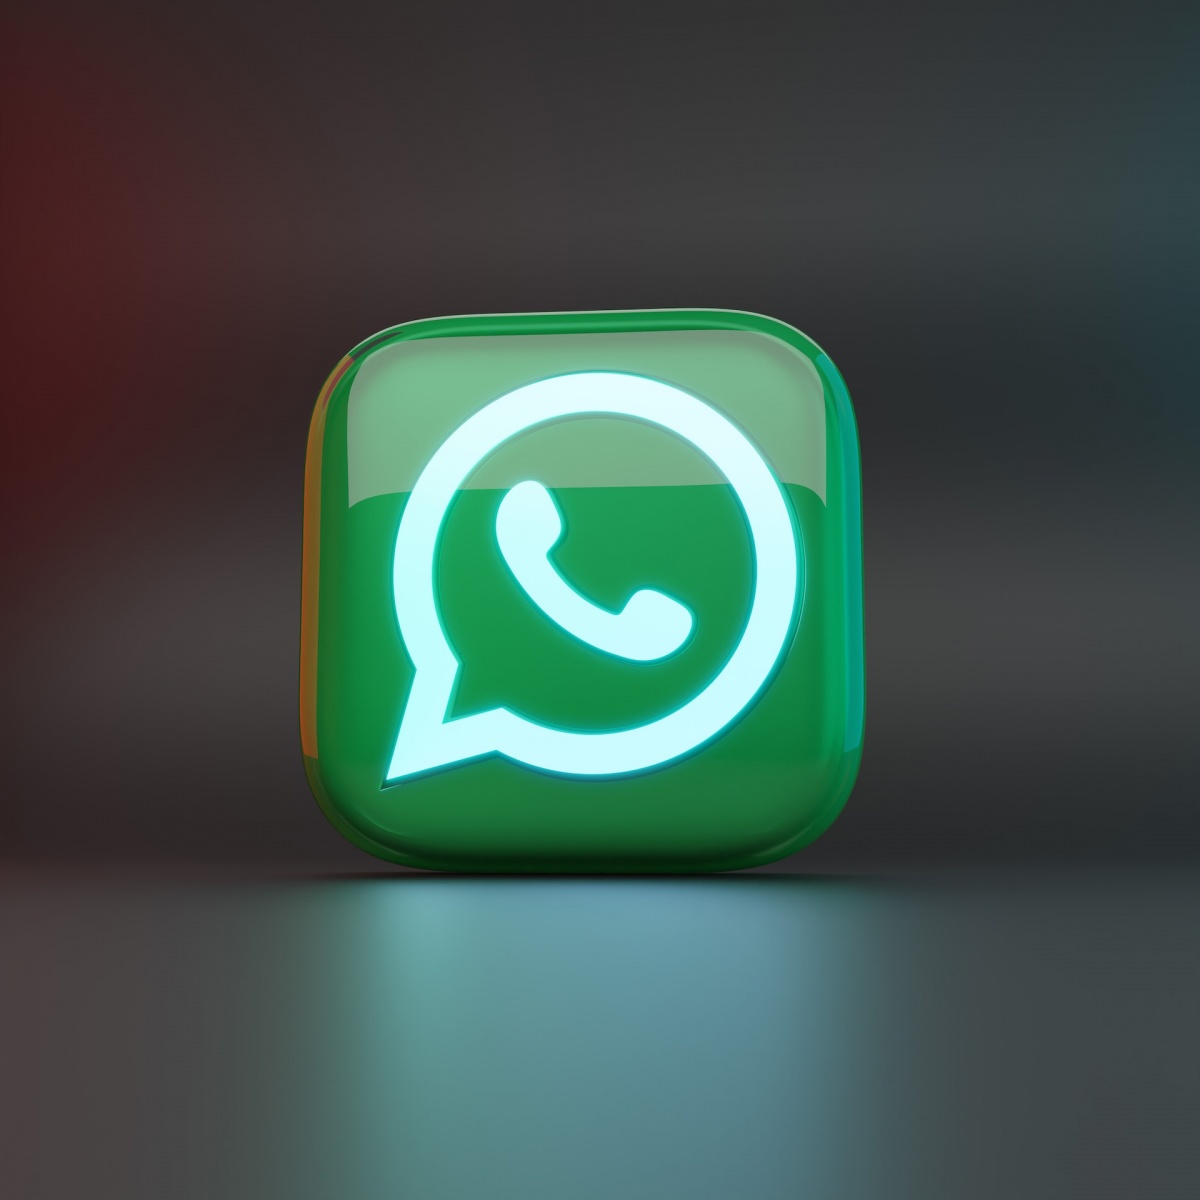 WhatsApp Brings Faster Way to Transfer Your Chats From Your Old Device to a New One Via QR Code